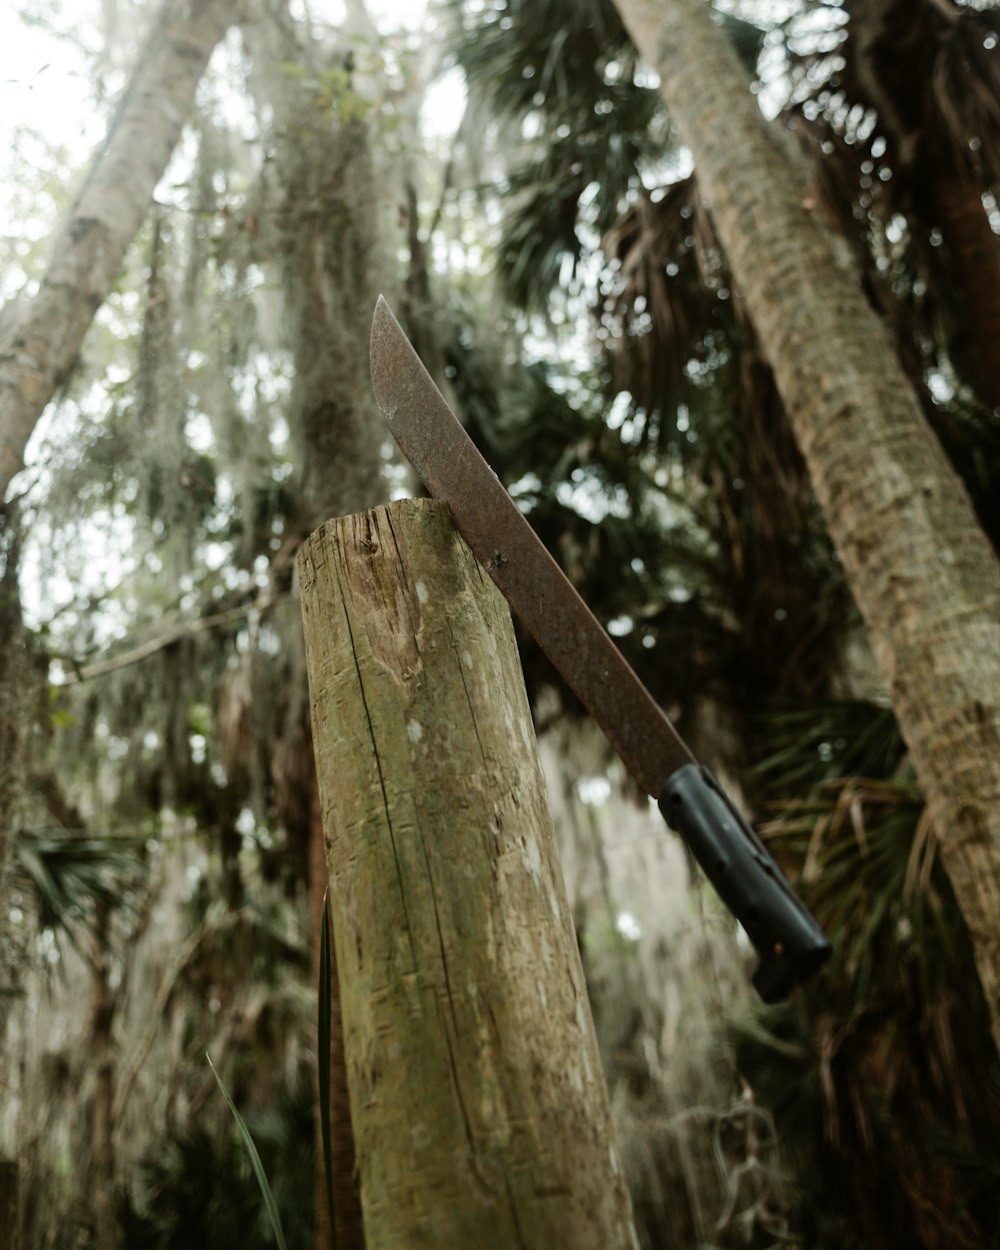 a knife stuck in a wooden post in a forest